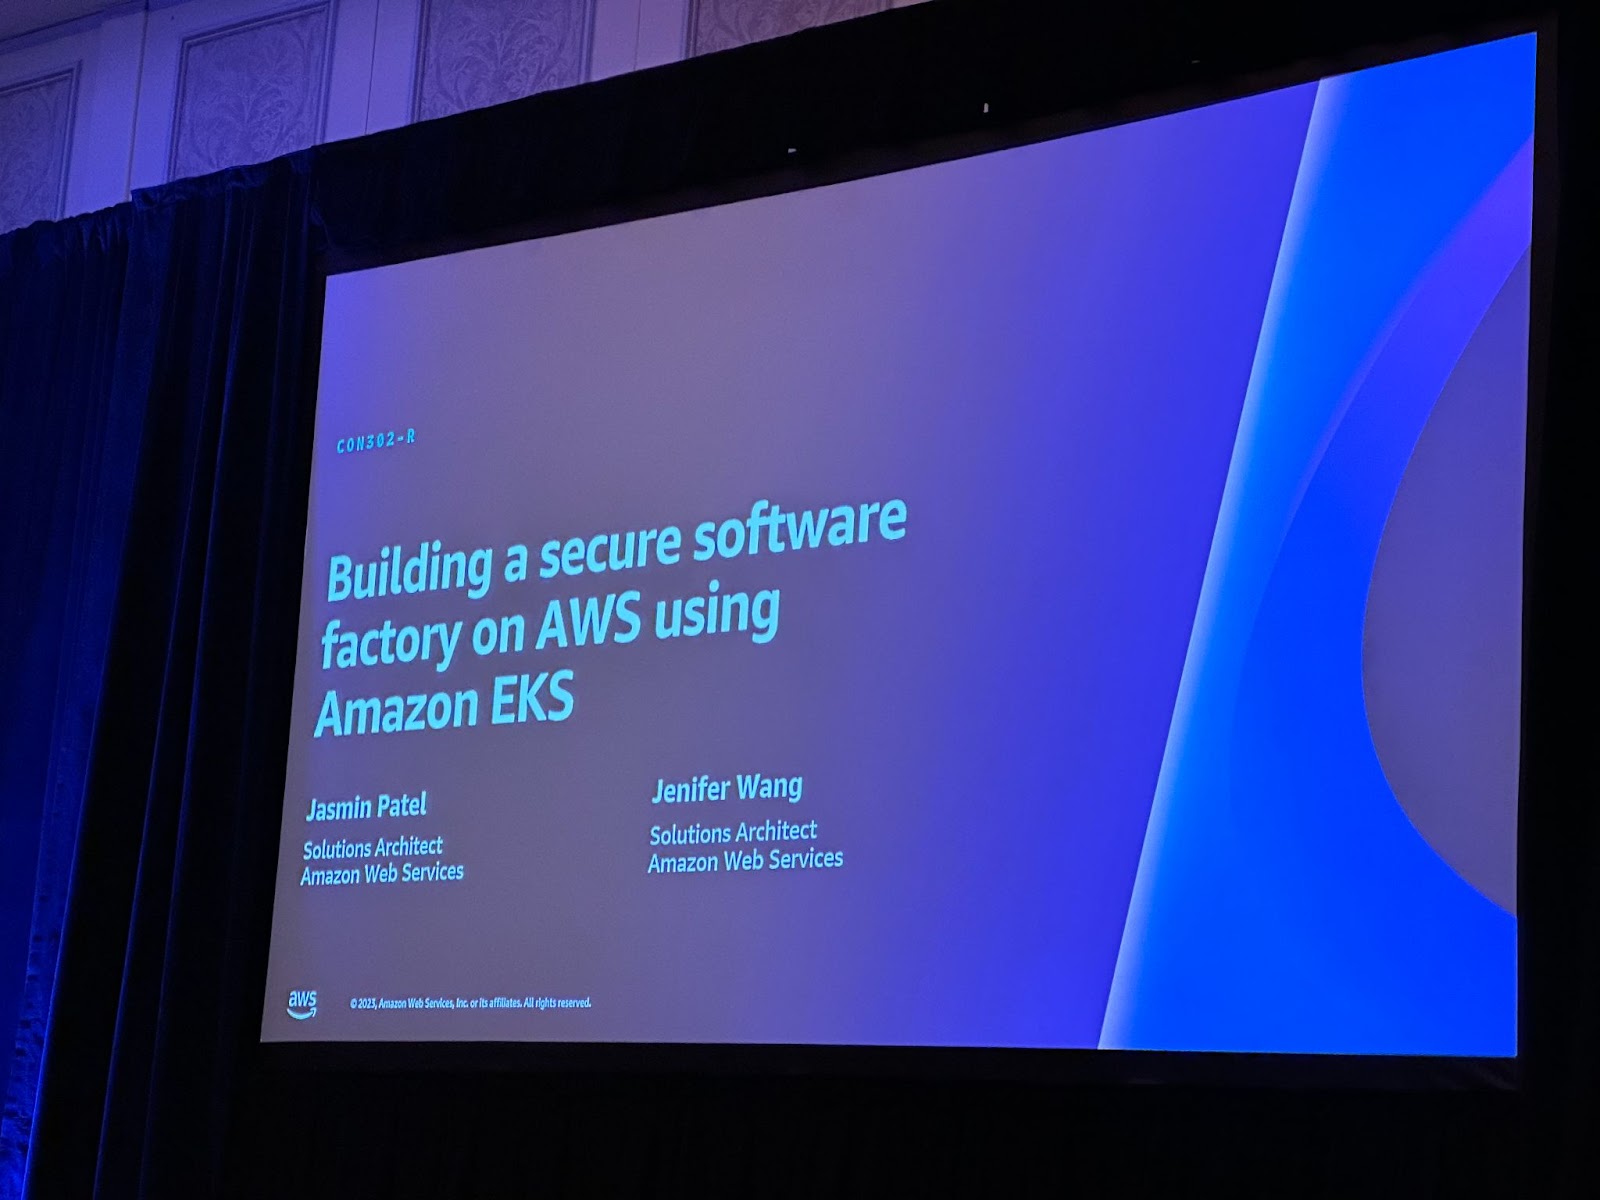 Building a secure software factory on AWS using Amazon EKS